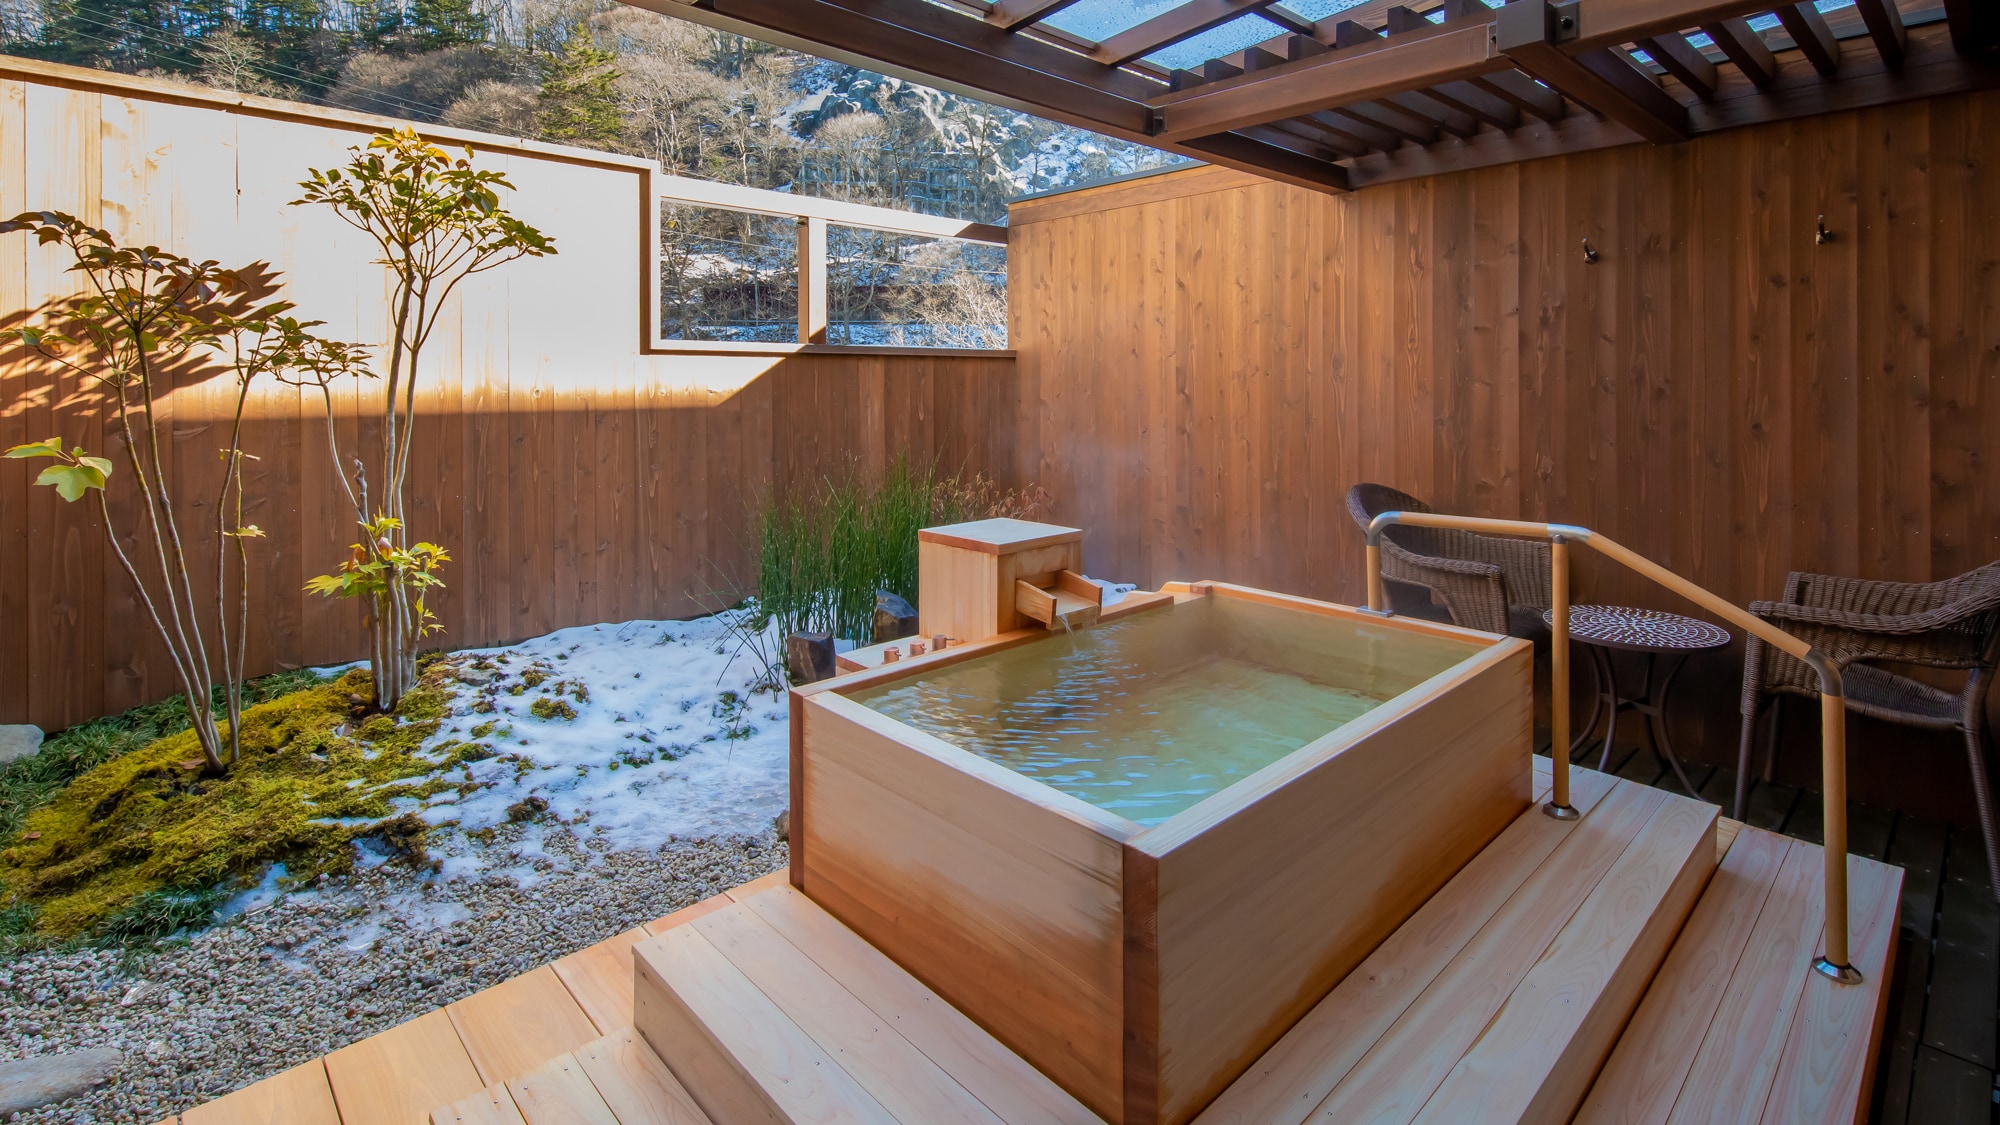 Miyama-tei, guest room with open-air bath ◆ Hot springs as much as you want, when you want. A room that will make your luxury holiday come true.